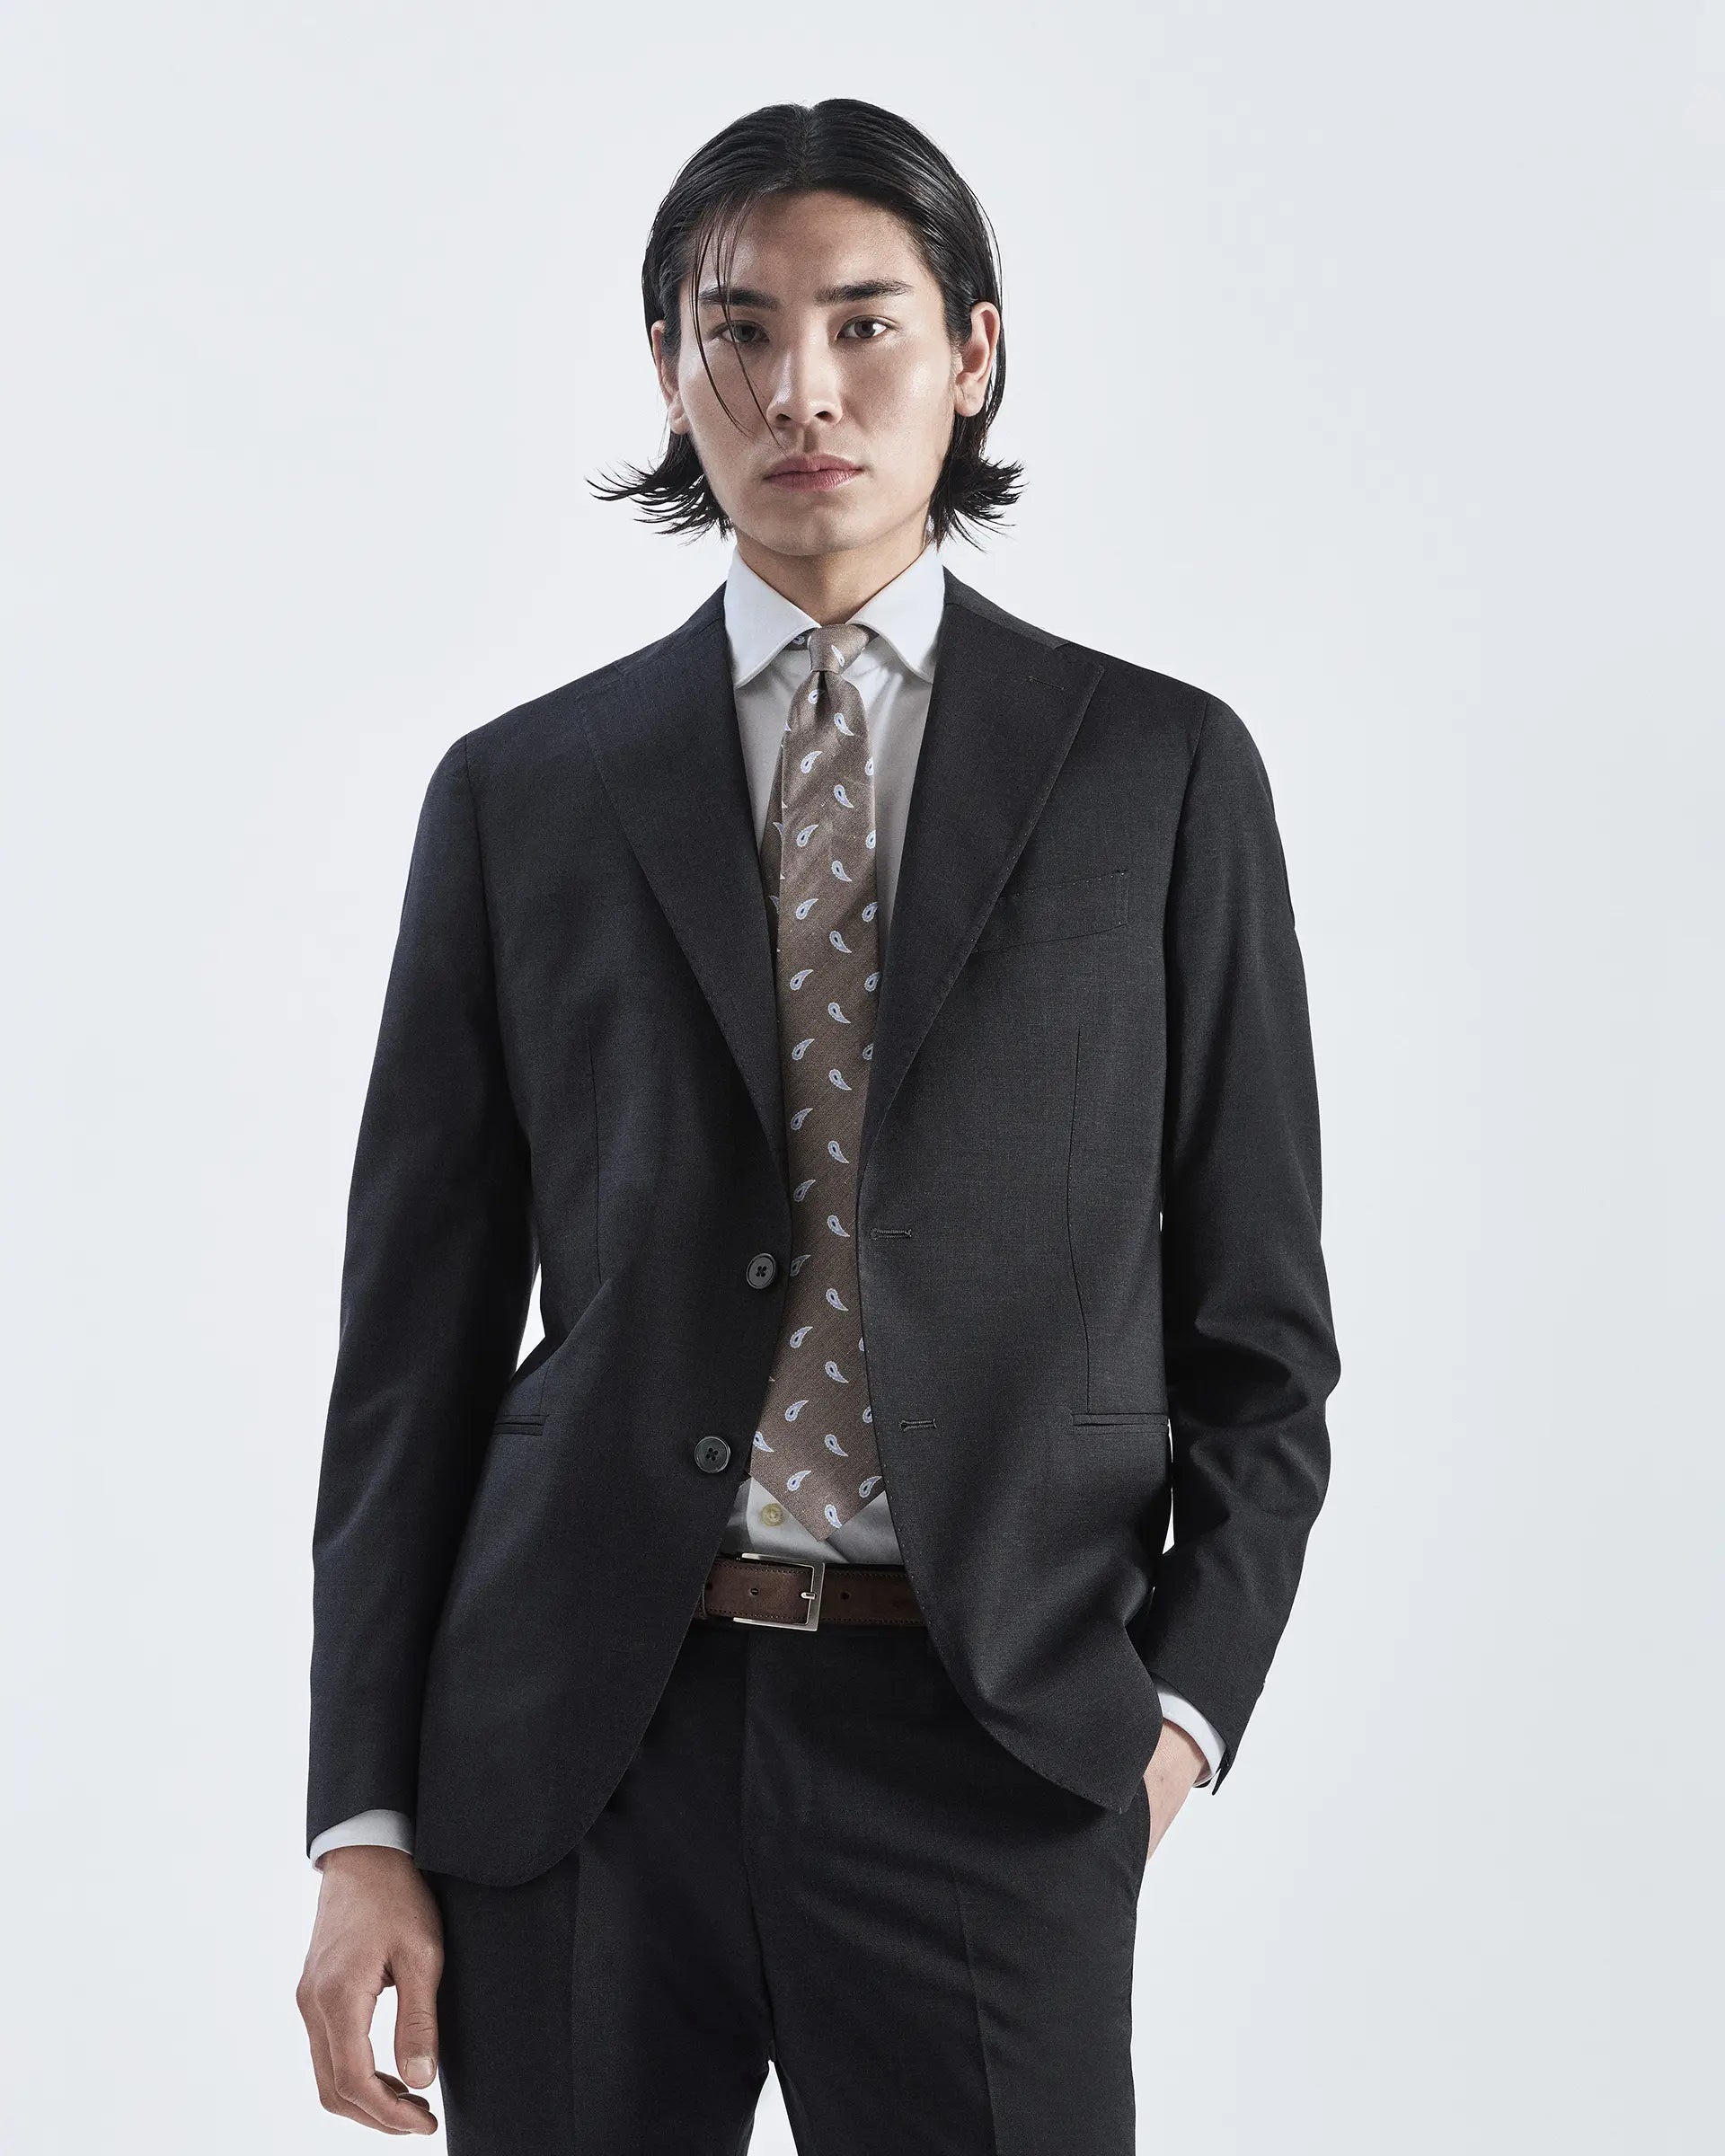 Anthracite suit in pure wool Tollegno fabric